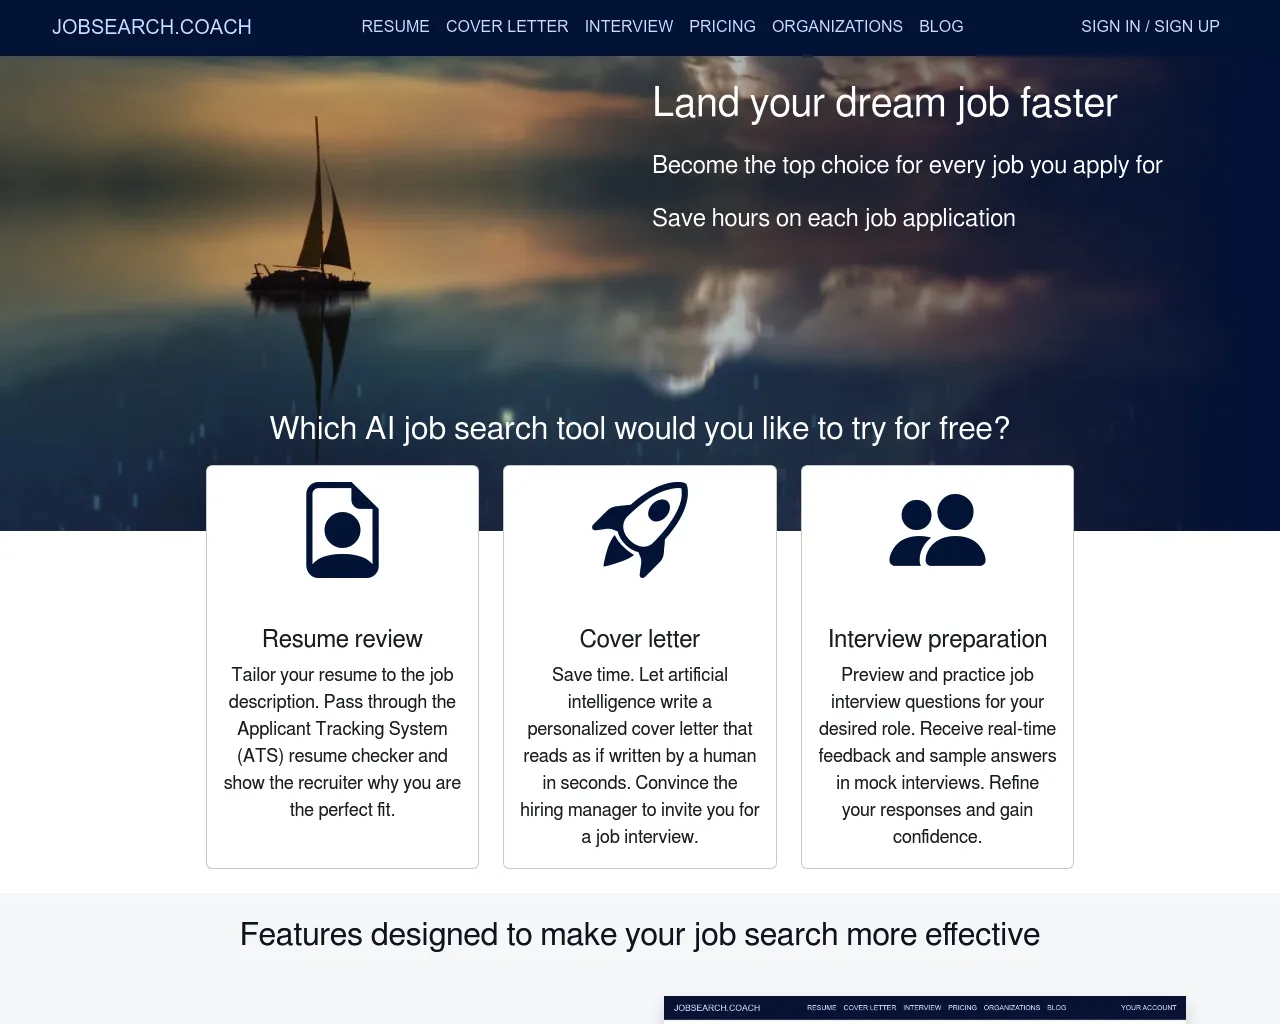 JobSearch.Coach - Land your dream job faster with AIEmailLinkedInTwitter